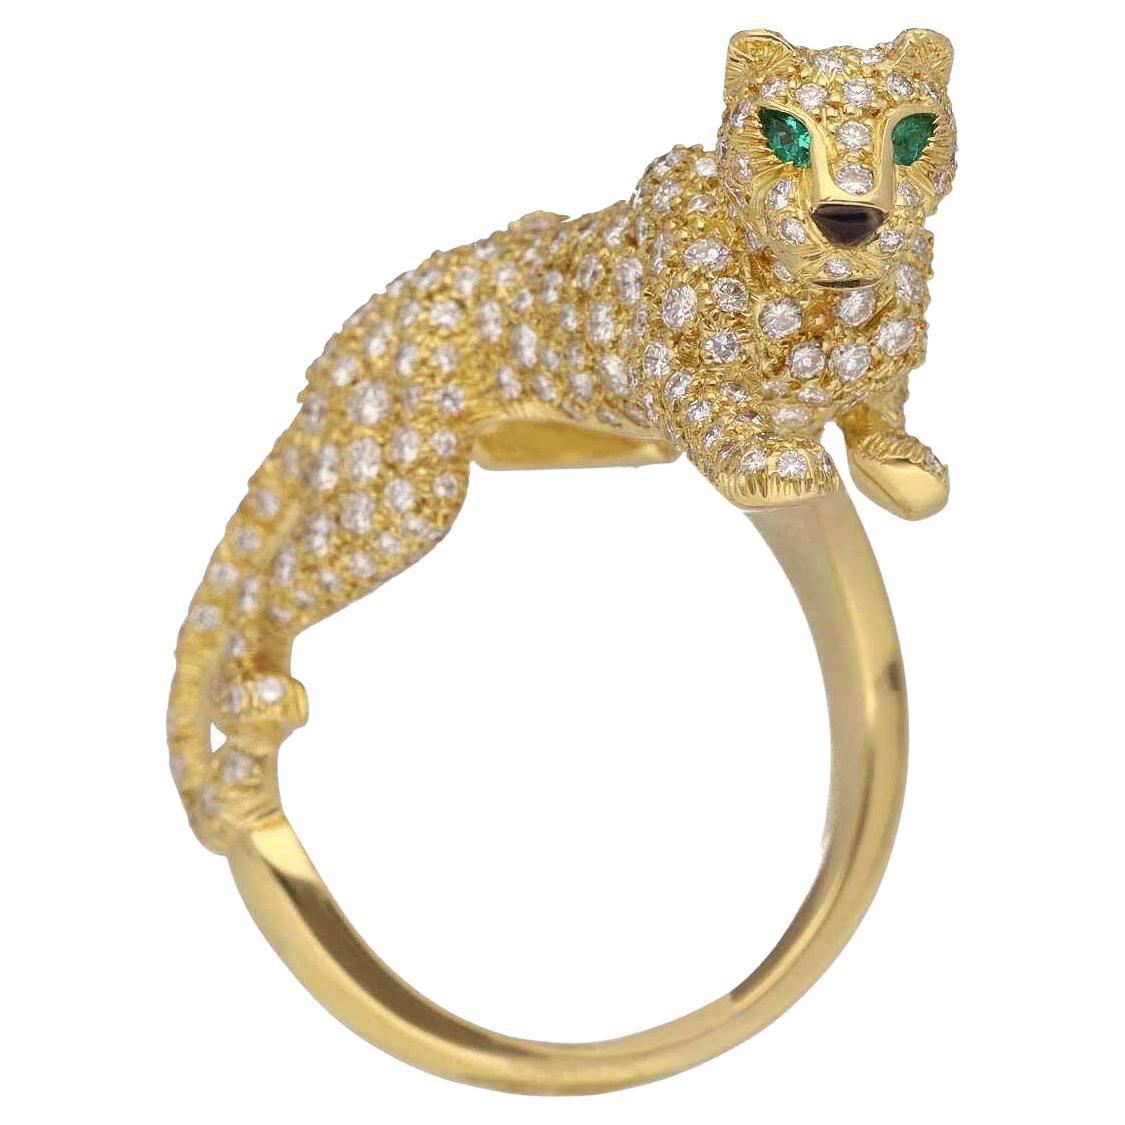 Cartier Panthere Sookie Ring Diamond Emerald Onyx 18 Karat Yellow Gold US Size 7 For Sale